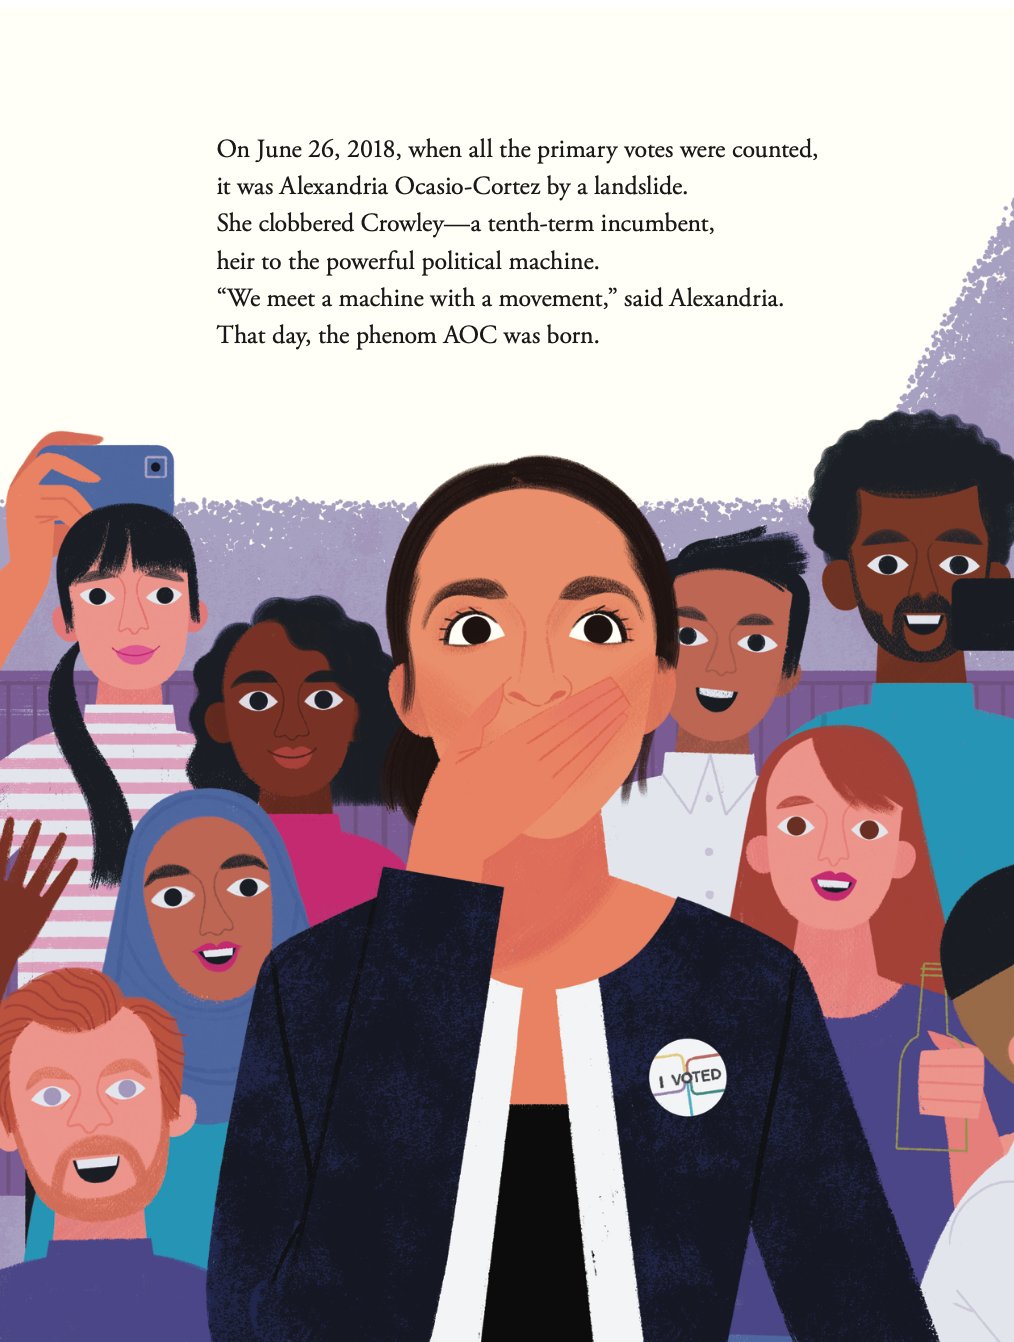 Interior of Phenomenal AOC: The Roots and Rise of Alexandria Ocasio-Cortez. Illustration of AOC looking happily surprised with her hand over her mouth. She is wearing a blue blazer with white piping. The background includes a crowd of smiling onlookers. 